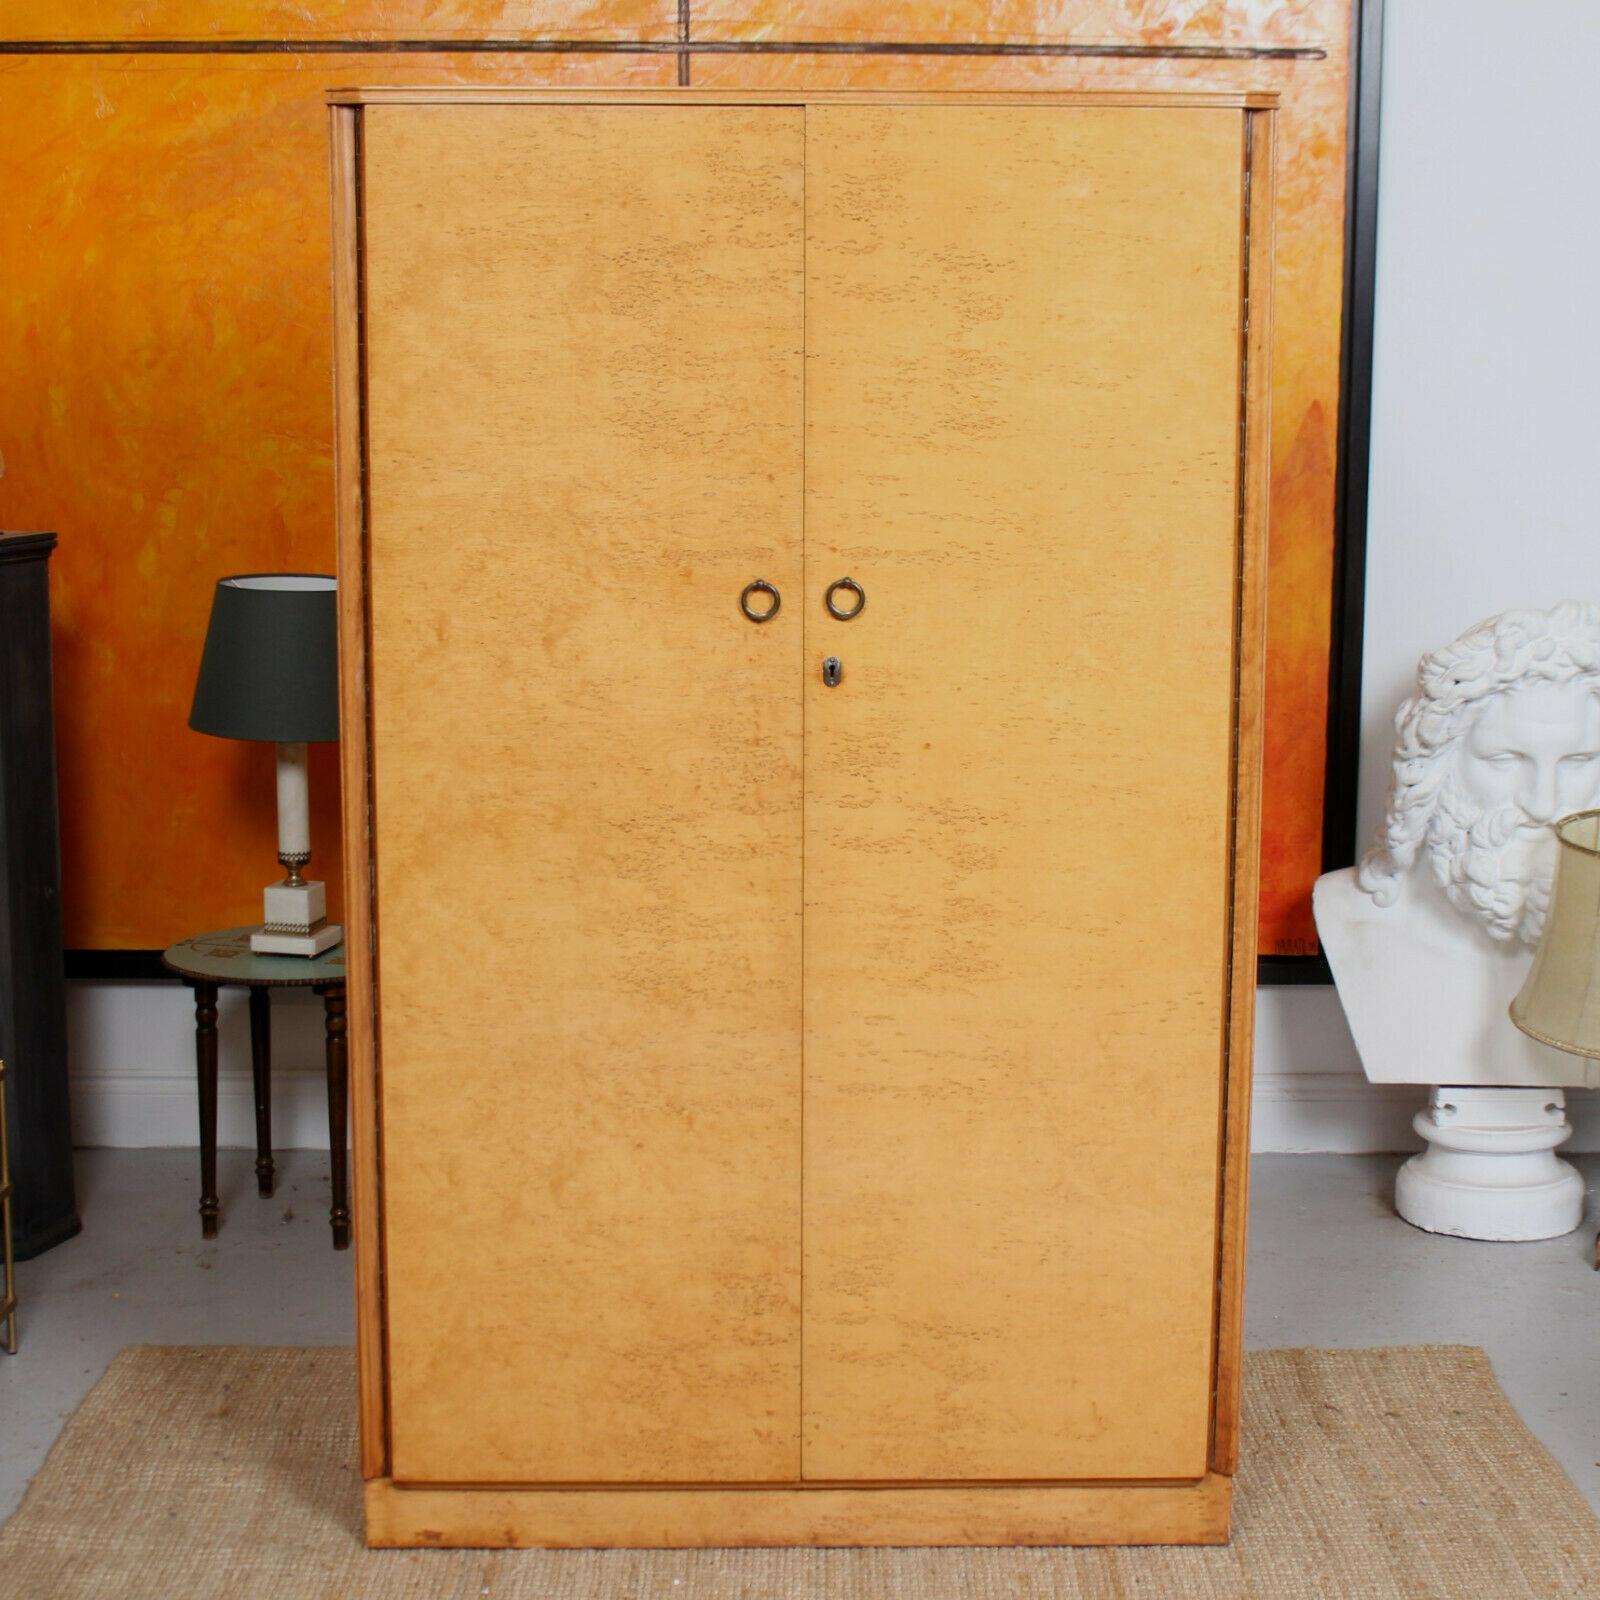 A fine quality bird's-eye maple compactum wardrobe.
The double doors enclosed a mahogany lined fitted interior comprising tie rack, hanging rail, shelving, drawers and footrails. Raised on a plinth base.
England, circa 1950.